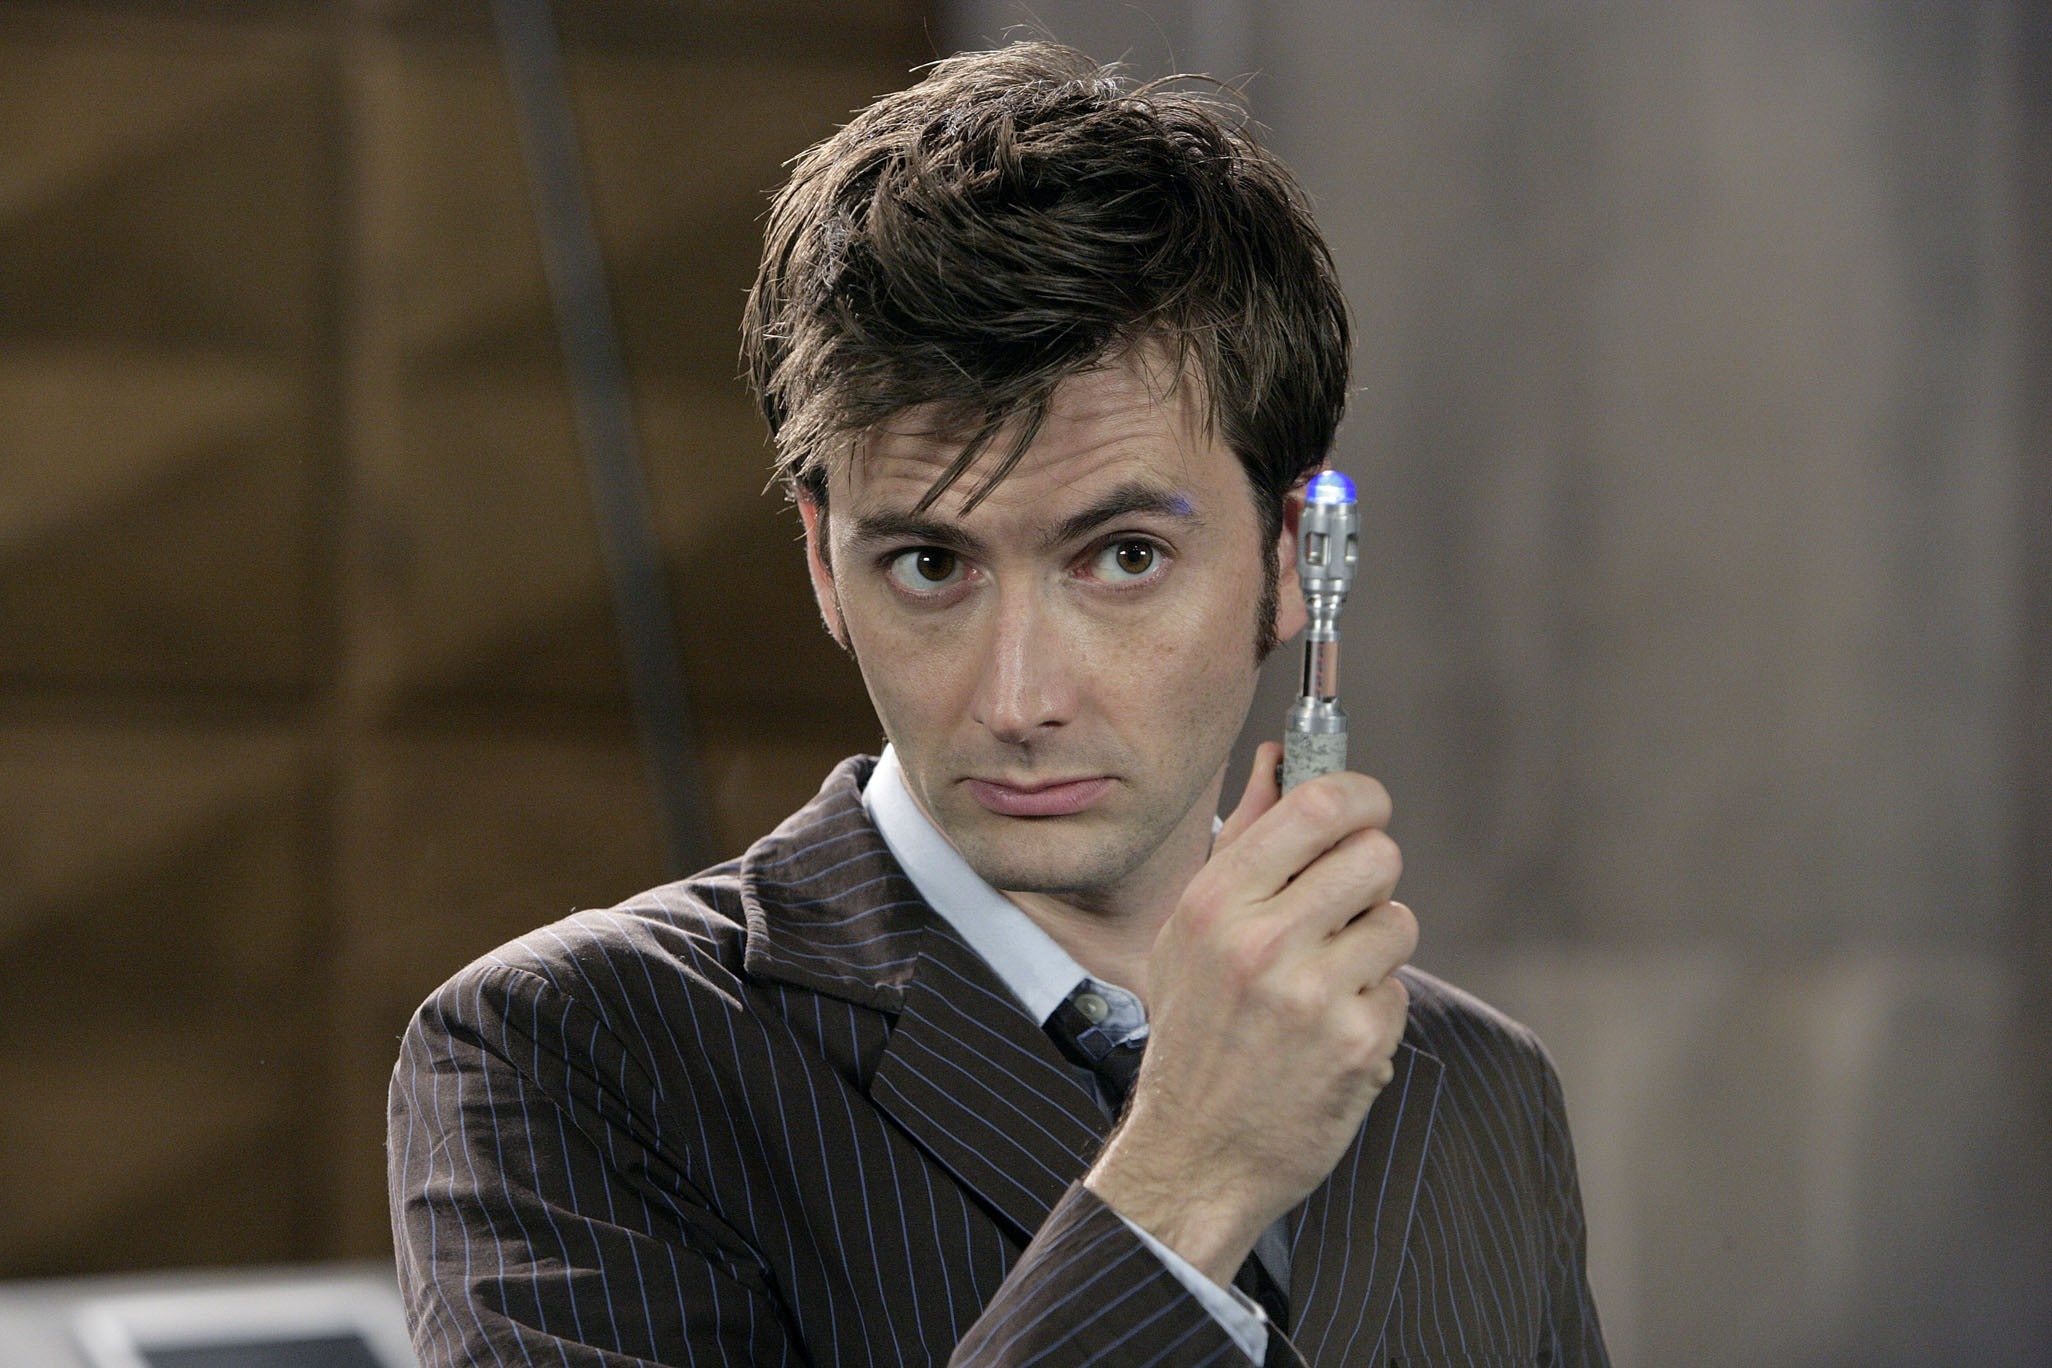 the tenth doctor shows off his sonic screwdriver in doomsday.